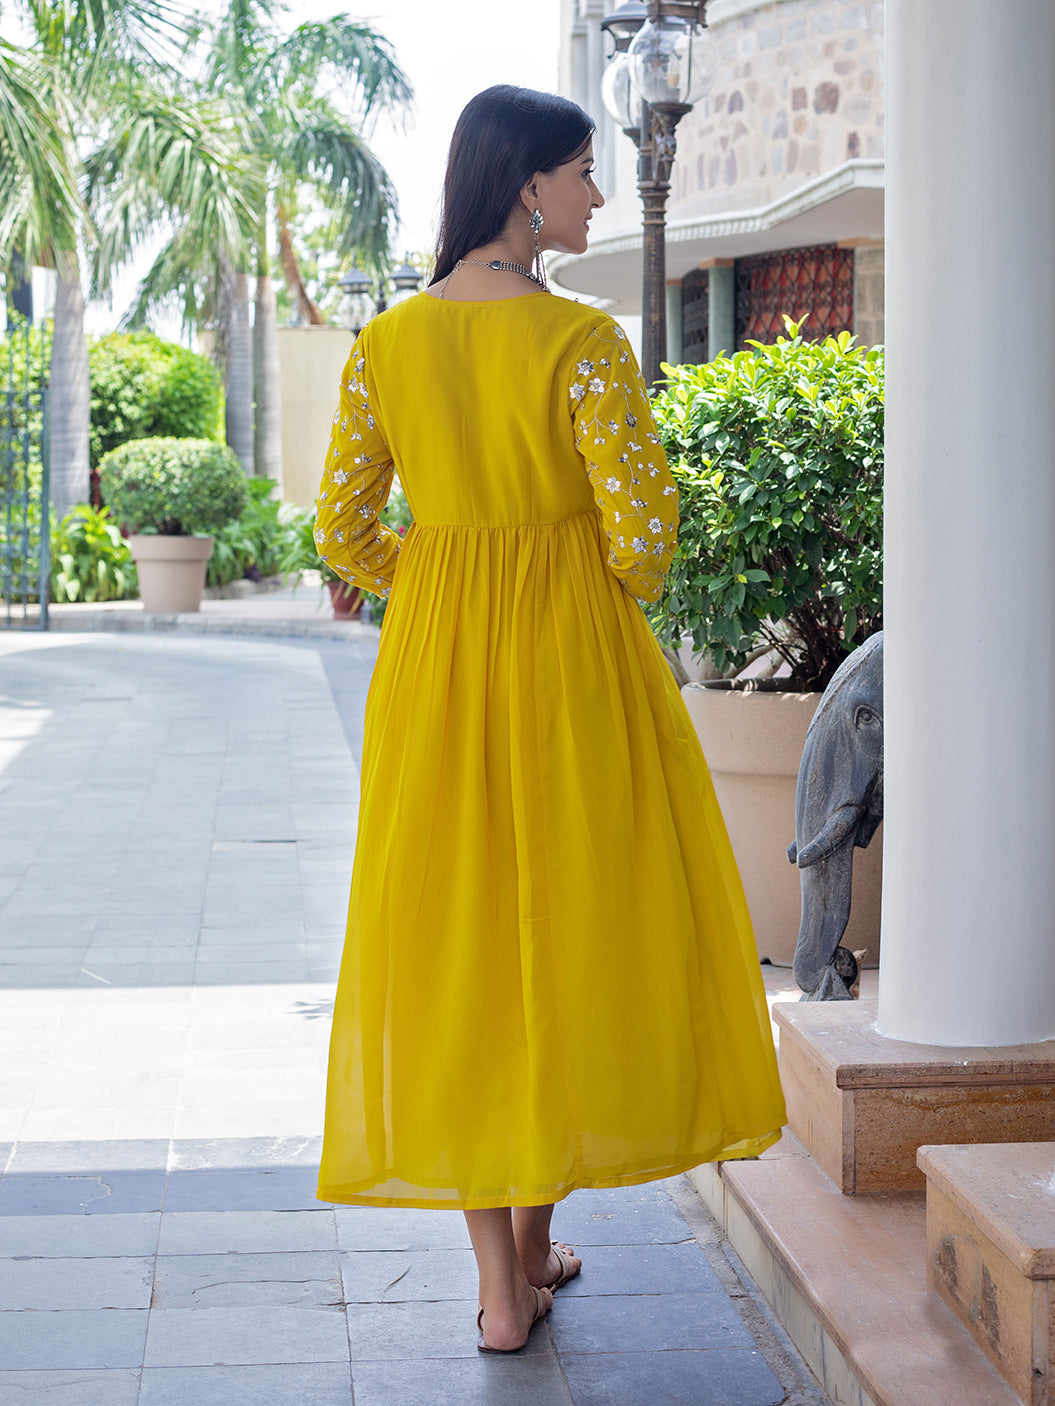 shine-bright-in-our-pastel-mustard-yellow-anarkali-dress-gleaming-sequin-embroidery-makes-you-the-star-of-the-show